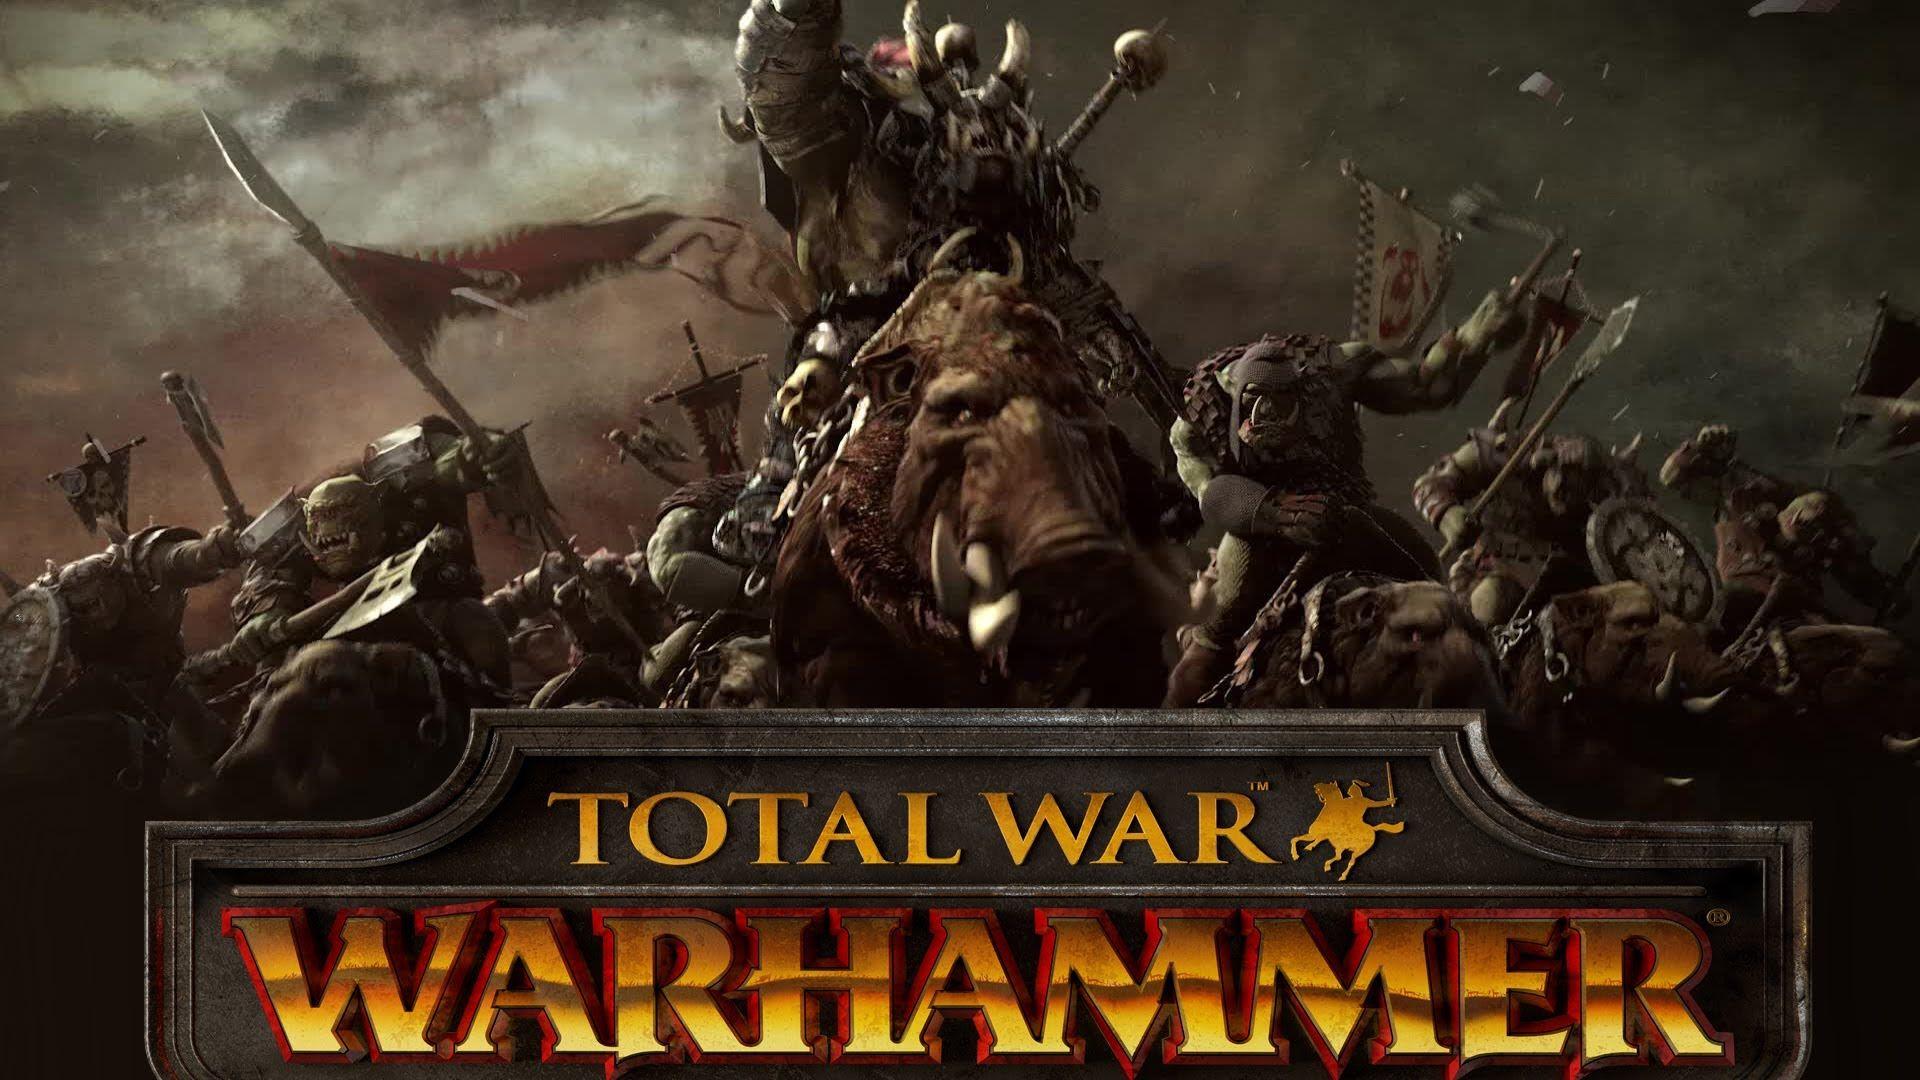 Total War: Warhammer Wallpapers, Pictures, Image